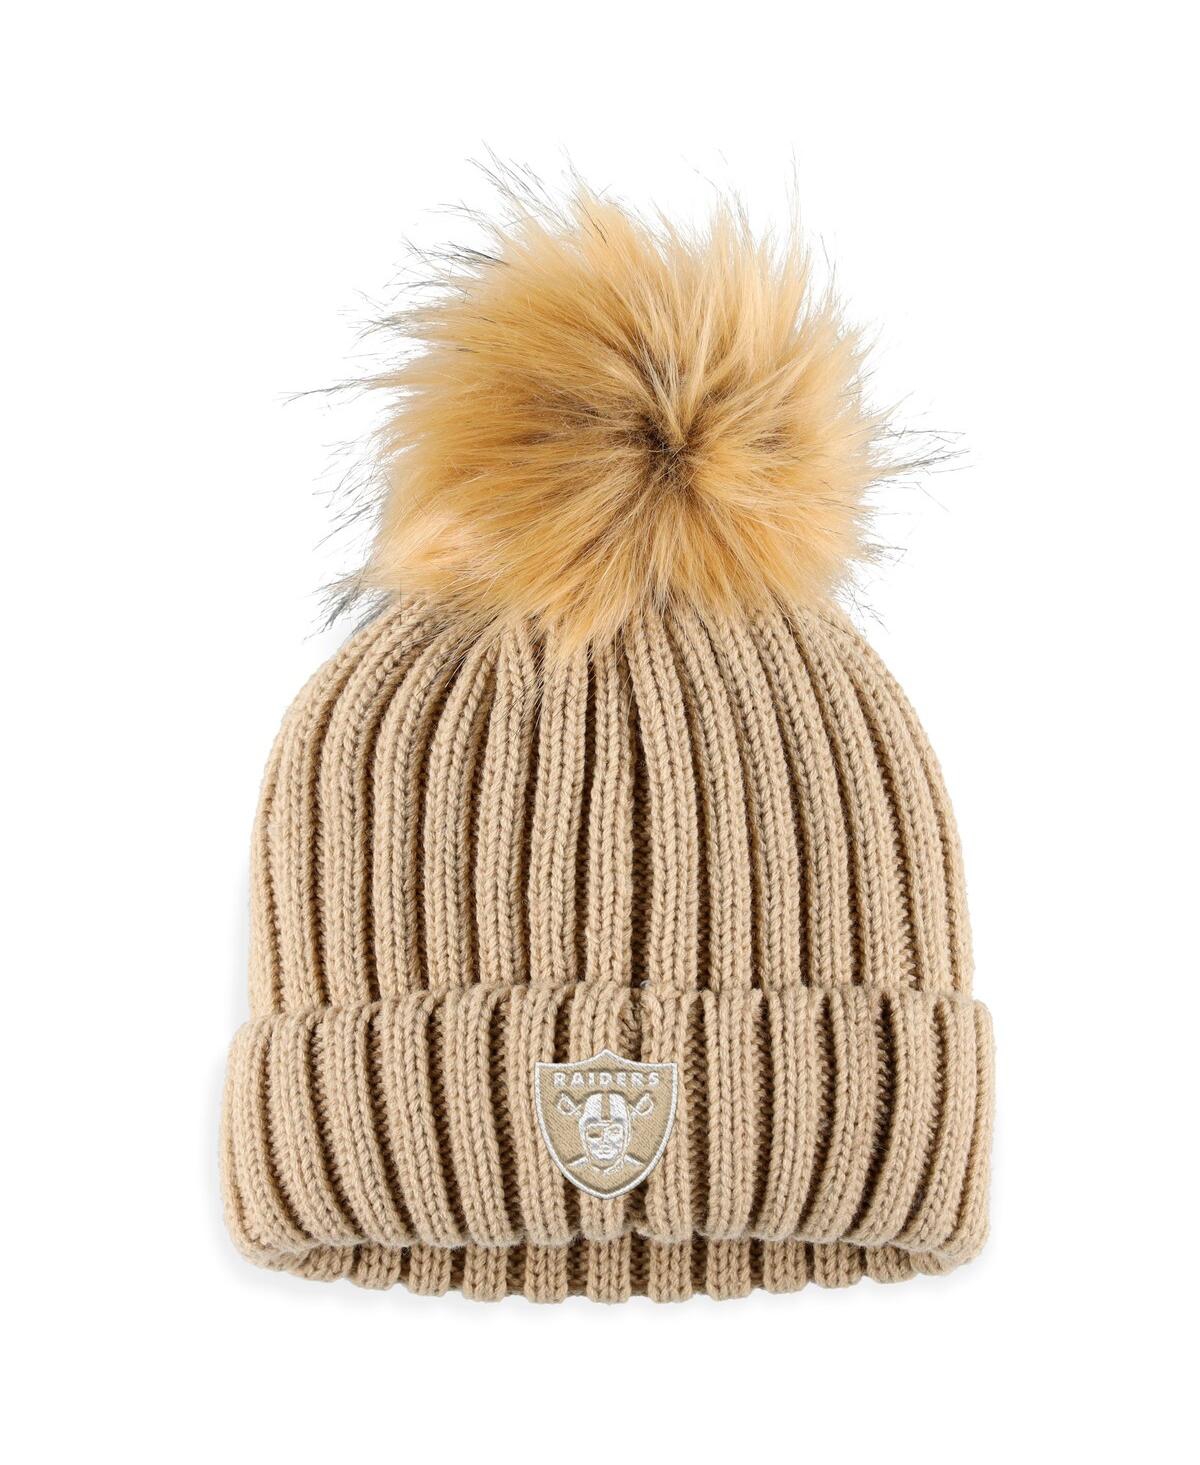 Wear By Erin Andrews Women's  Natural Las Vegas Raiders Neutral Cuffed Knit Hat With Pom